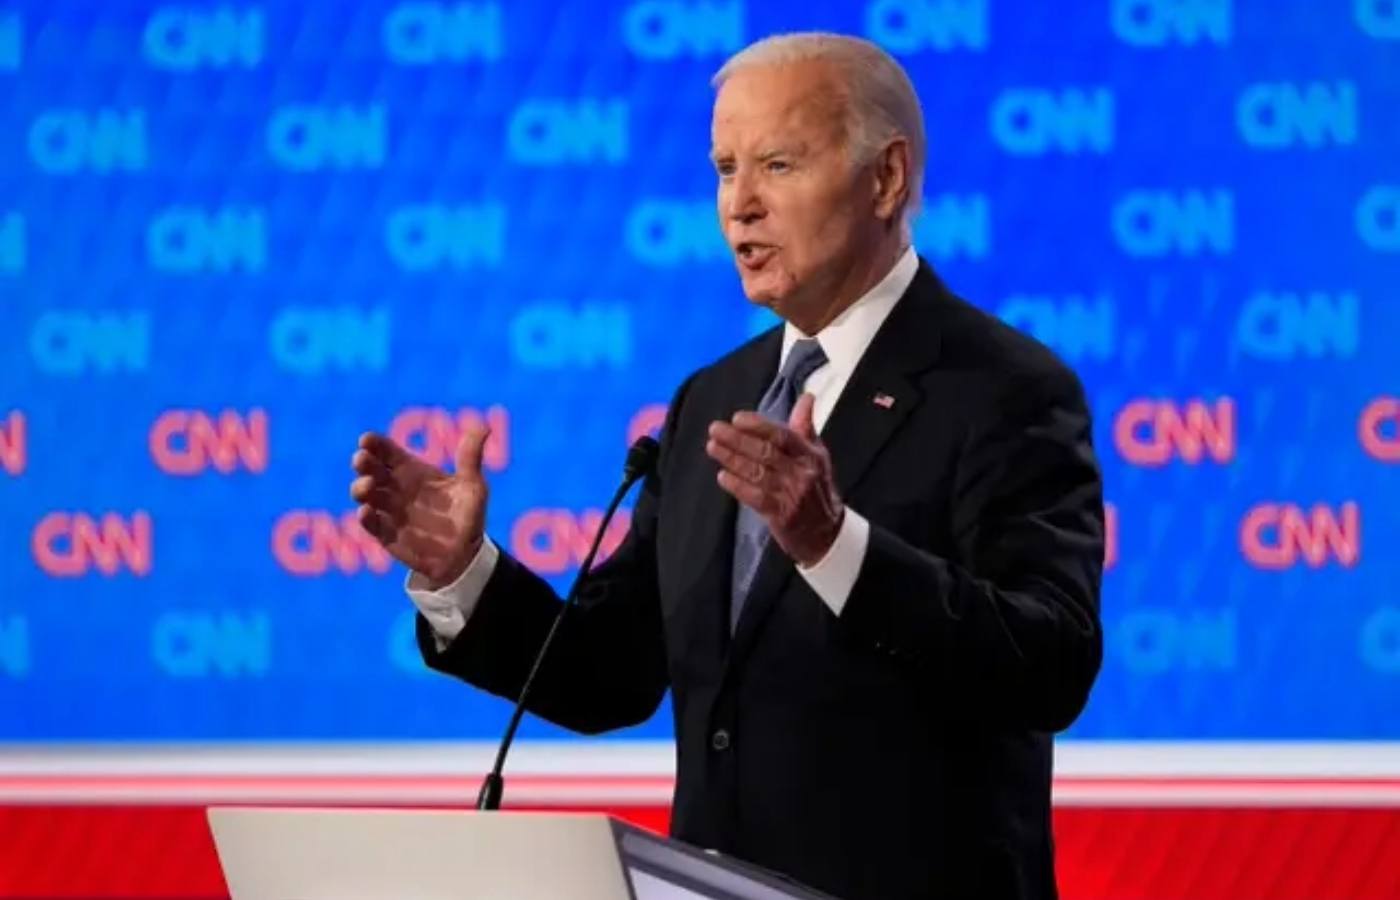 Biden had issues with his voice throughout the debate.